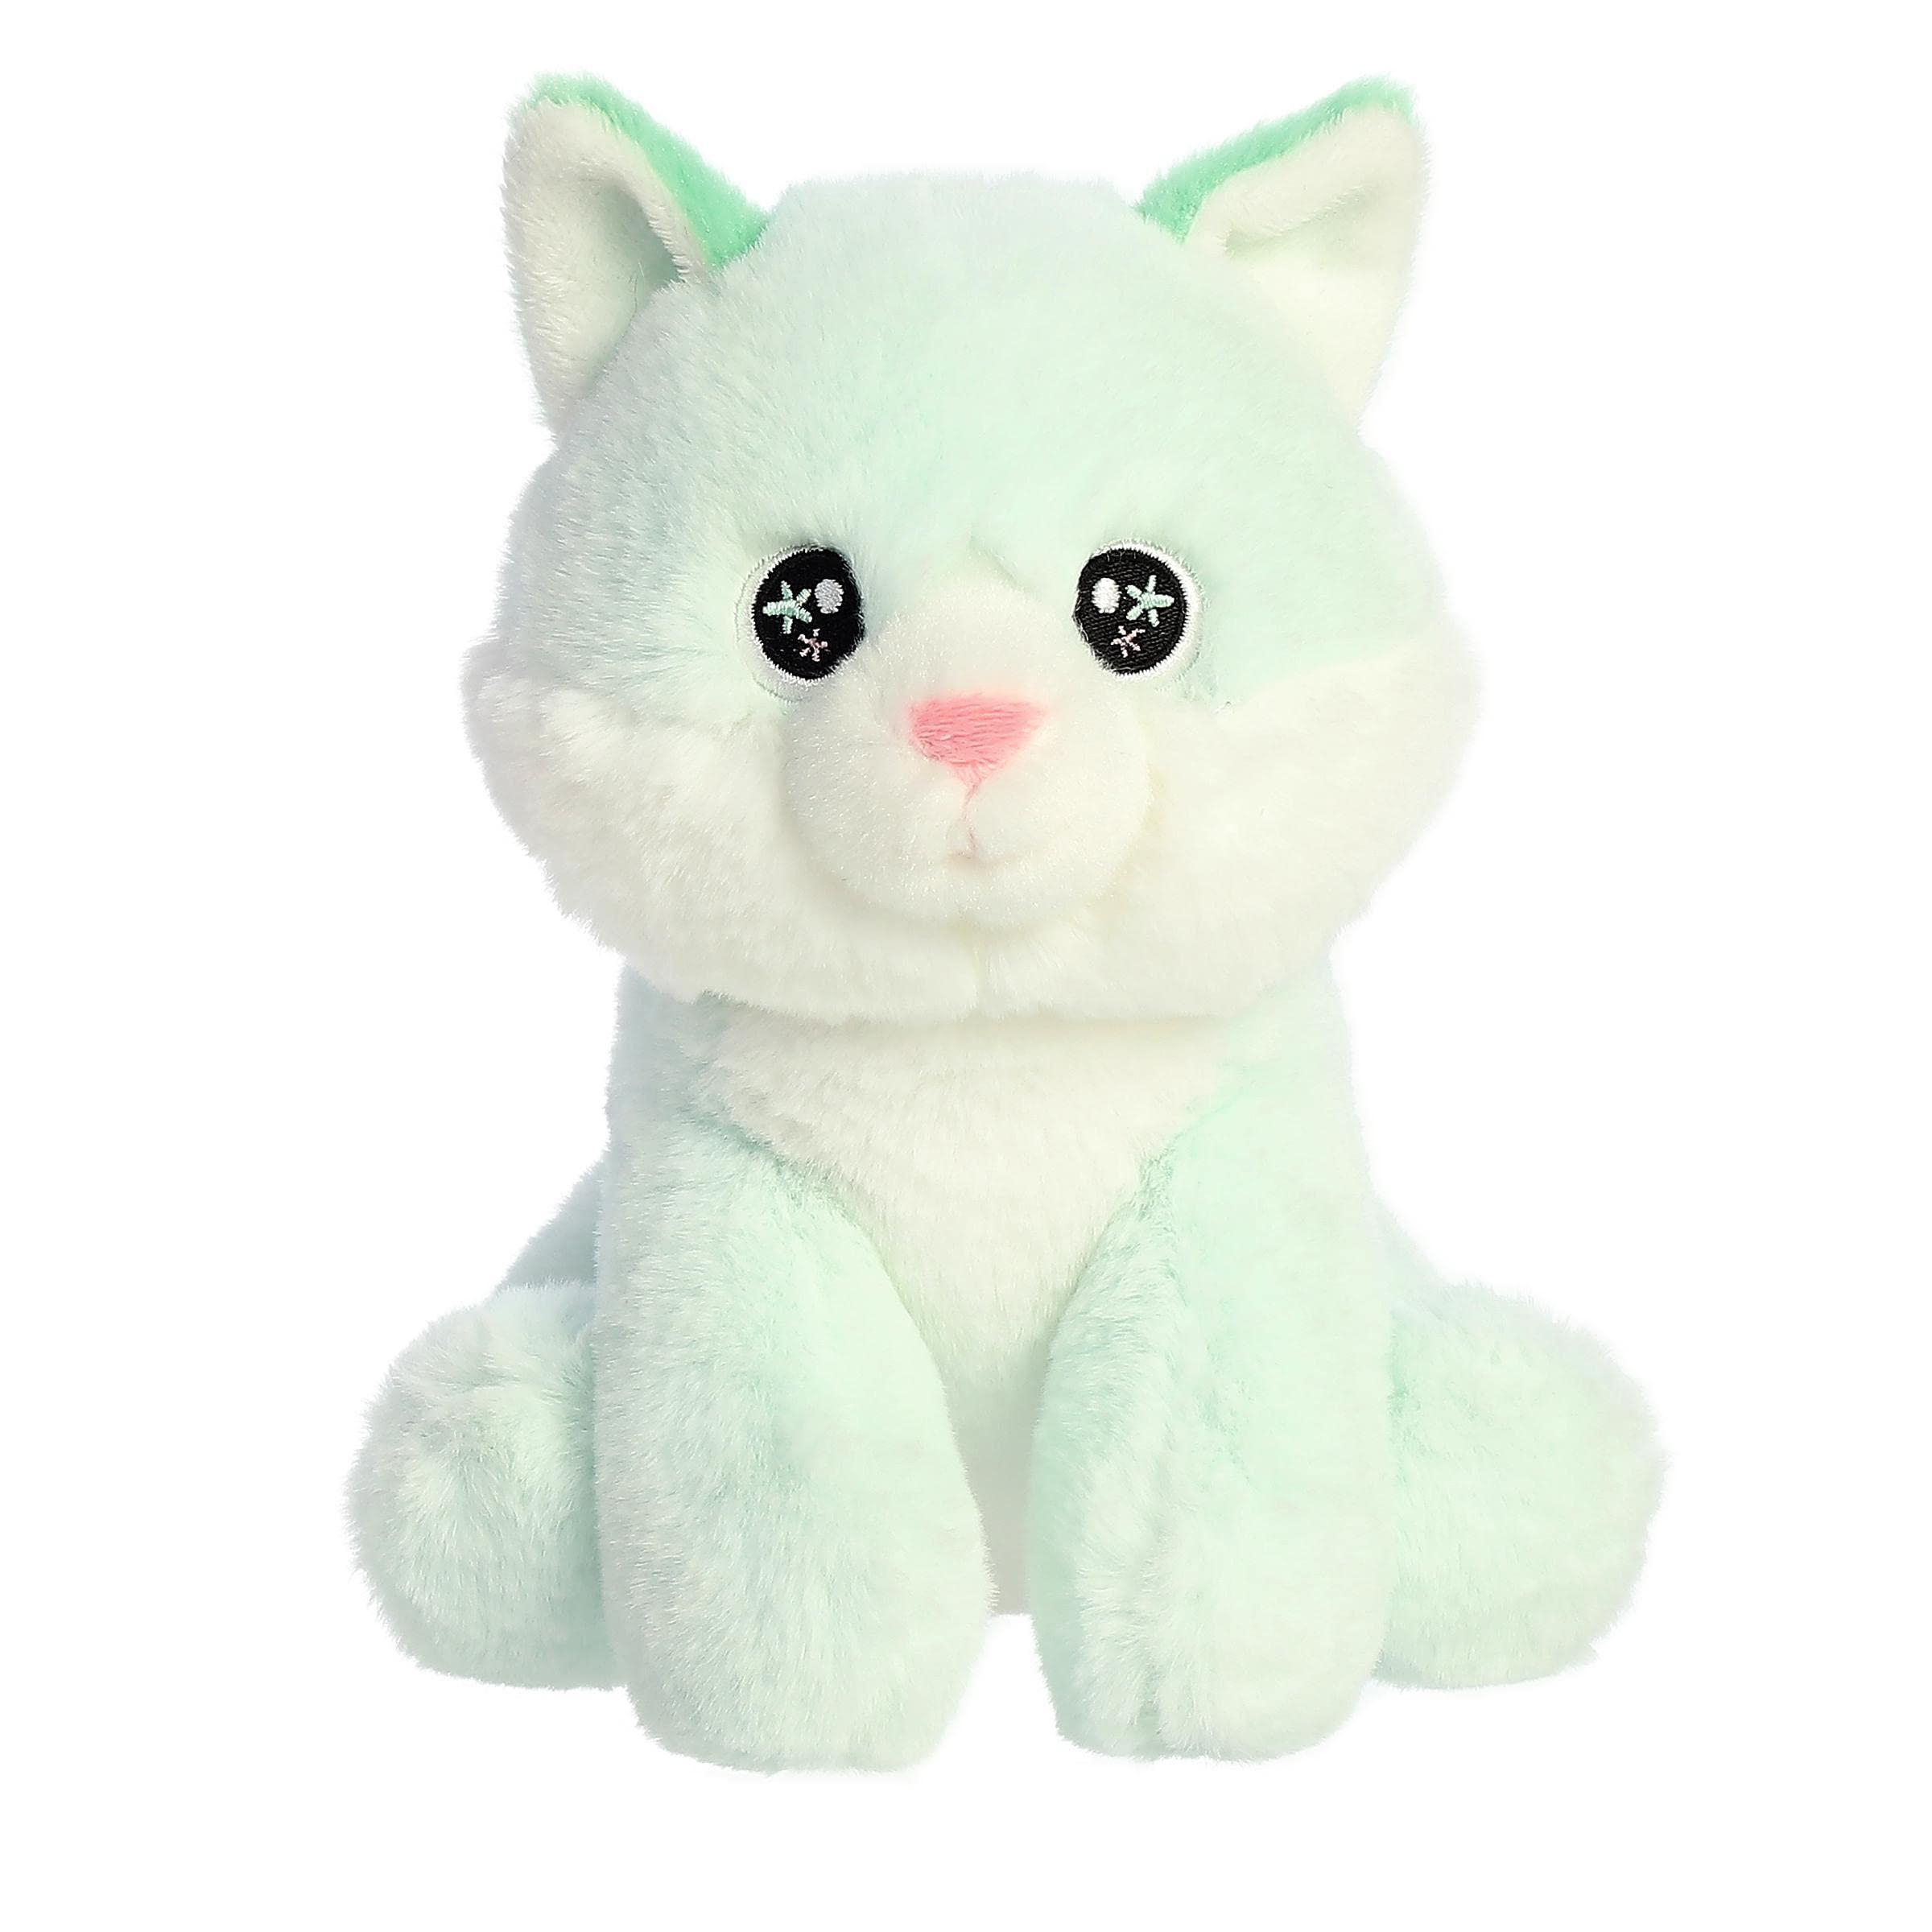 aurora eco-friendly eco nation neo kitty stuffed animal - environmental consciousness - recycled materials - green 8.5 inches